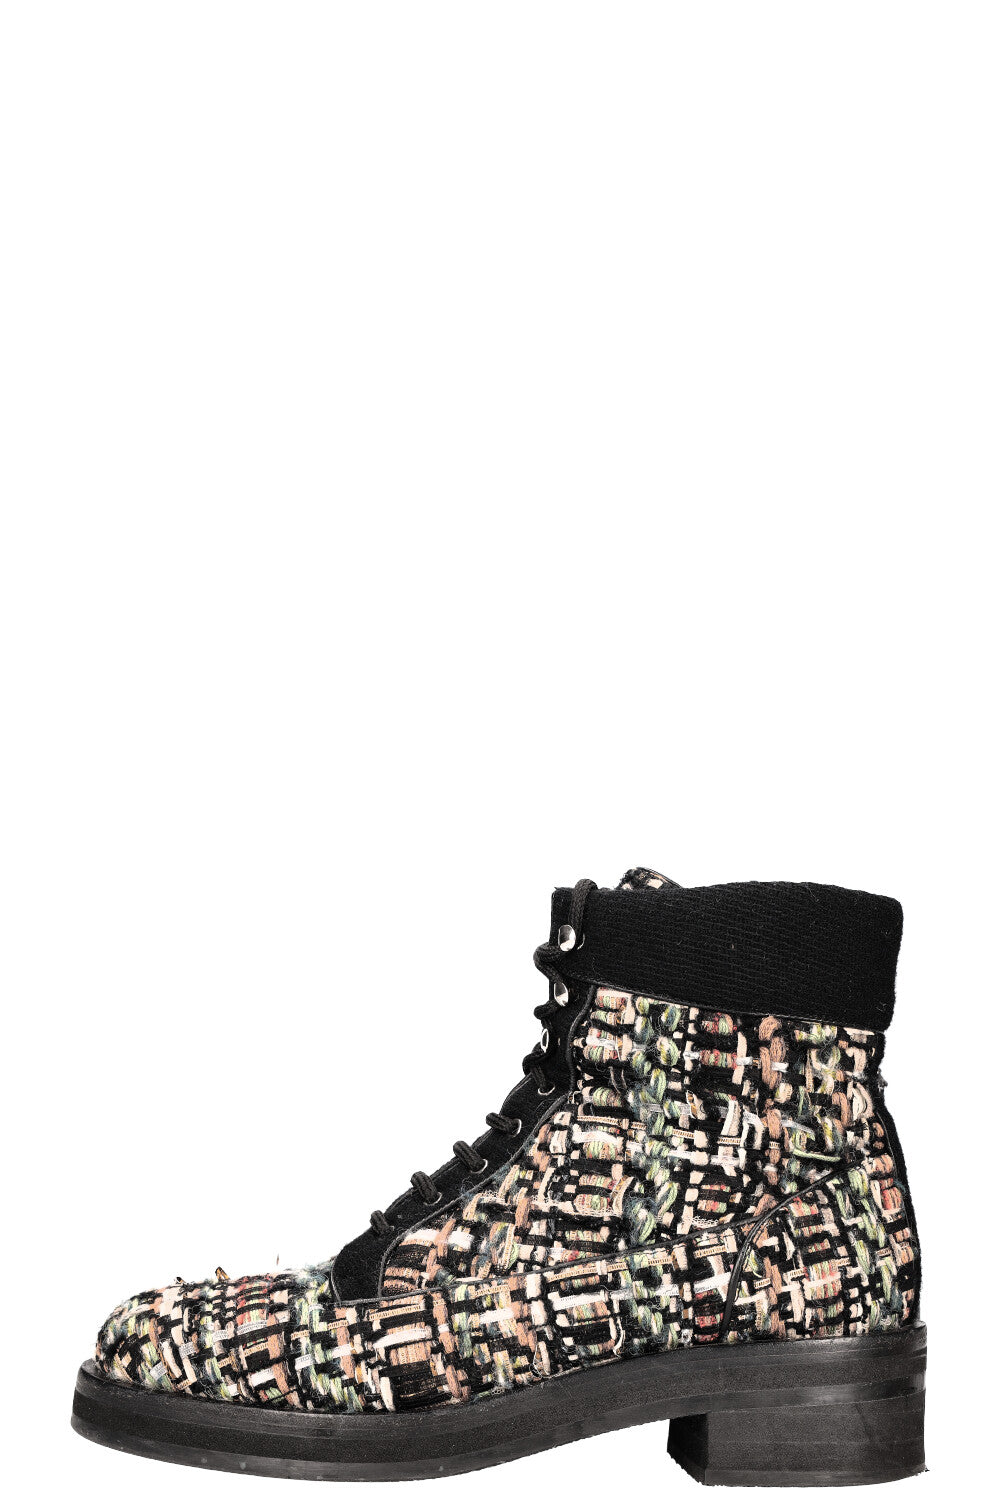 CHANEL Tweed Hiking Boots Multicolor